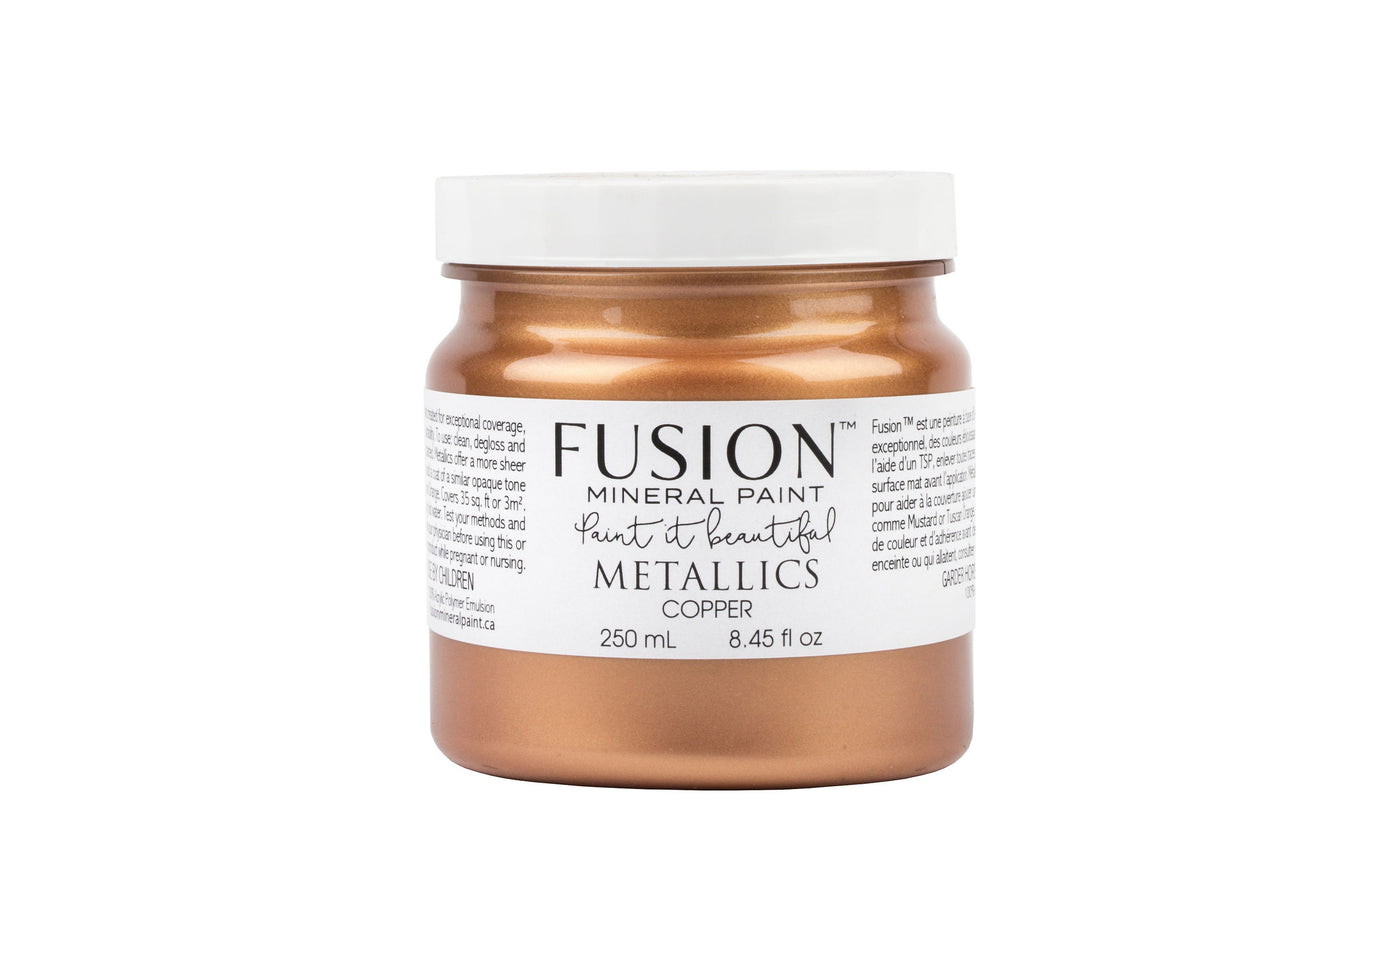 Copper 500ml pint from Fusion Mineral Paint